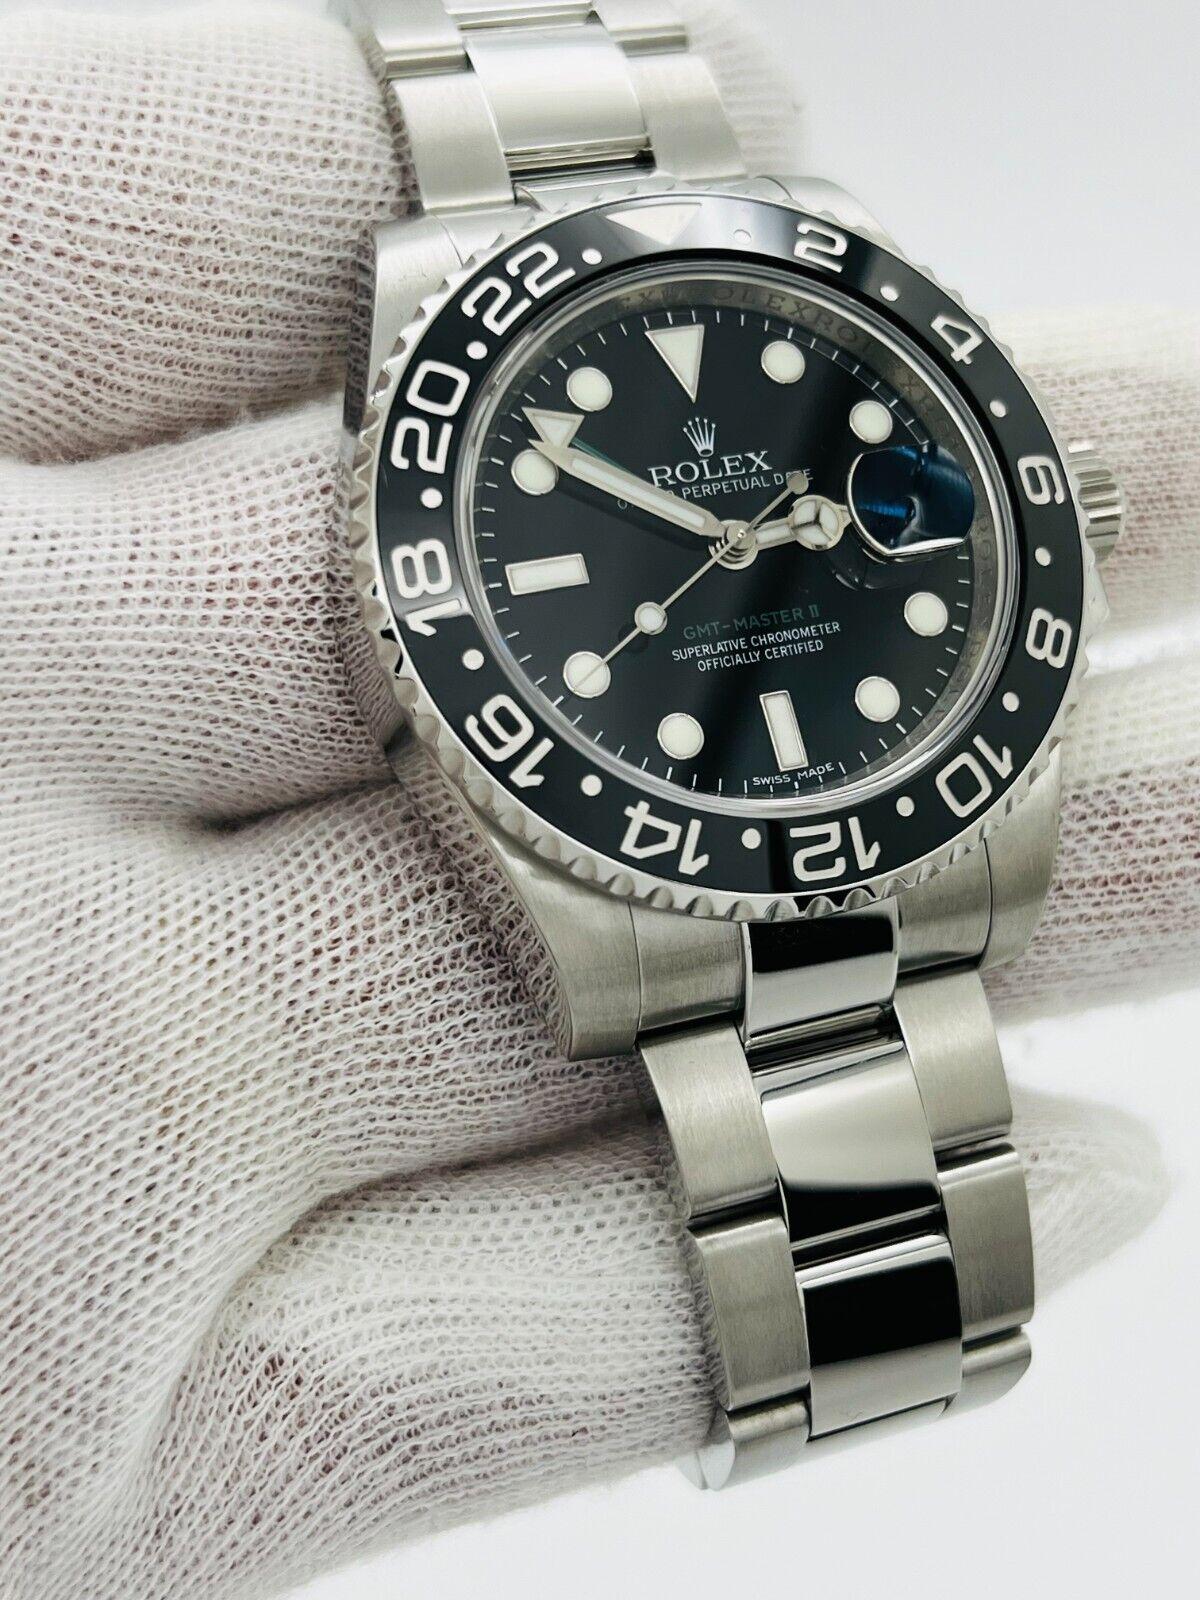  Rolex 116710 GMT Master II Black Ceramic Stainless Steel Box Paper 2011 For Sale 1